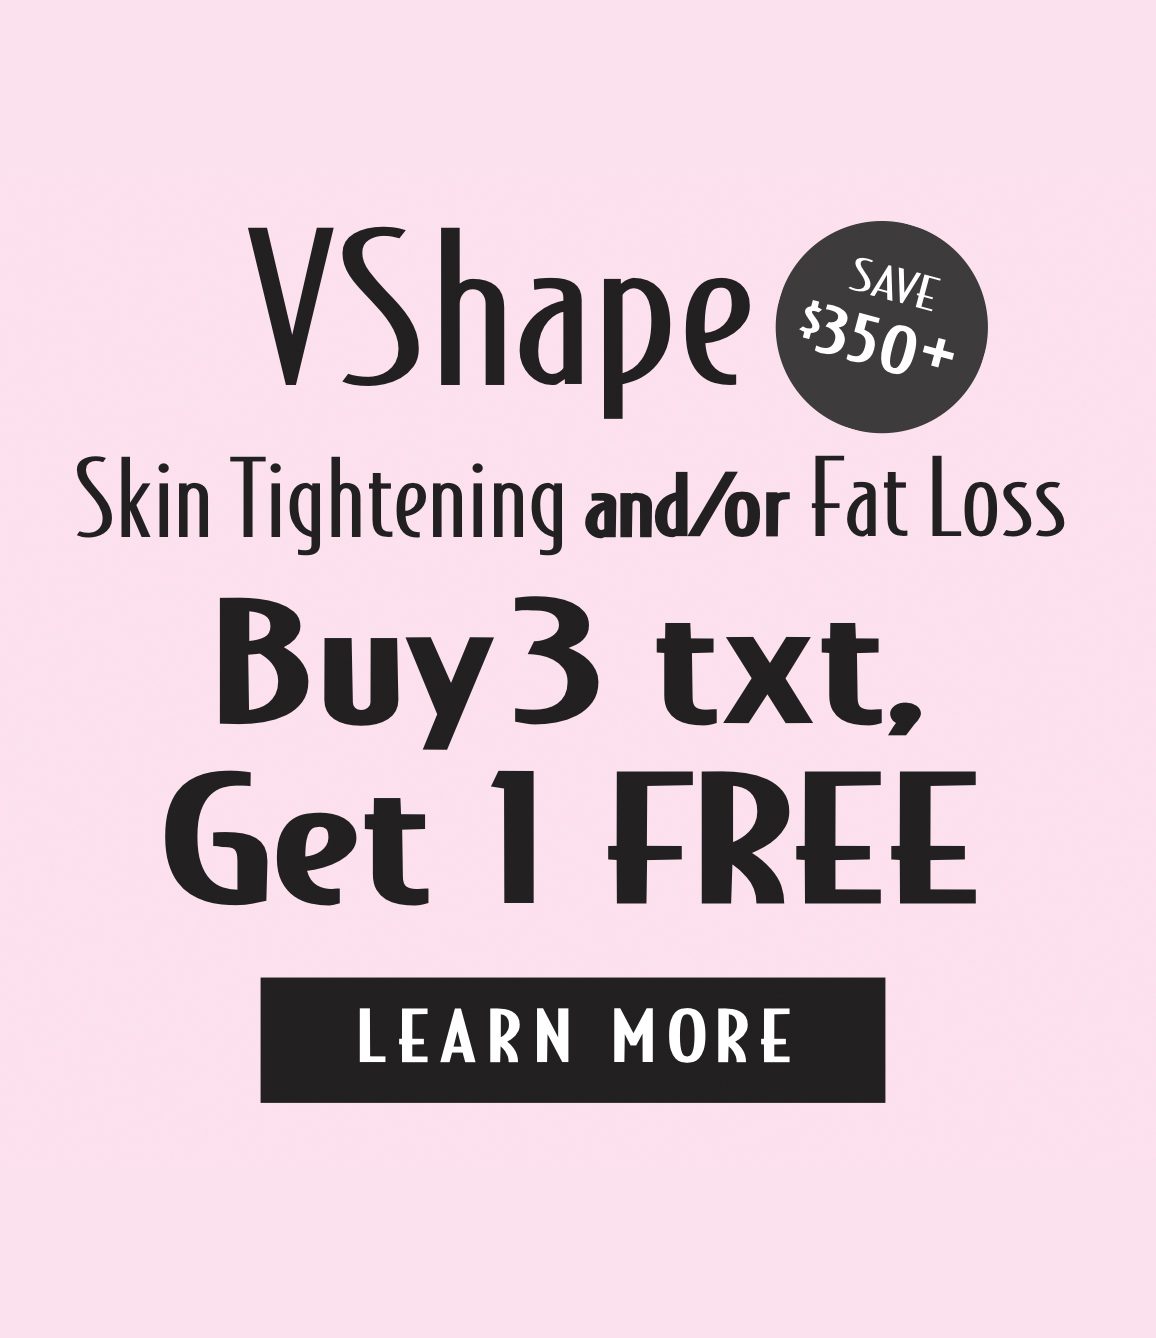 VShape - Buy 3 treatments and Get 1 FREE